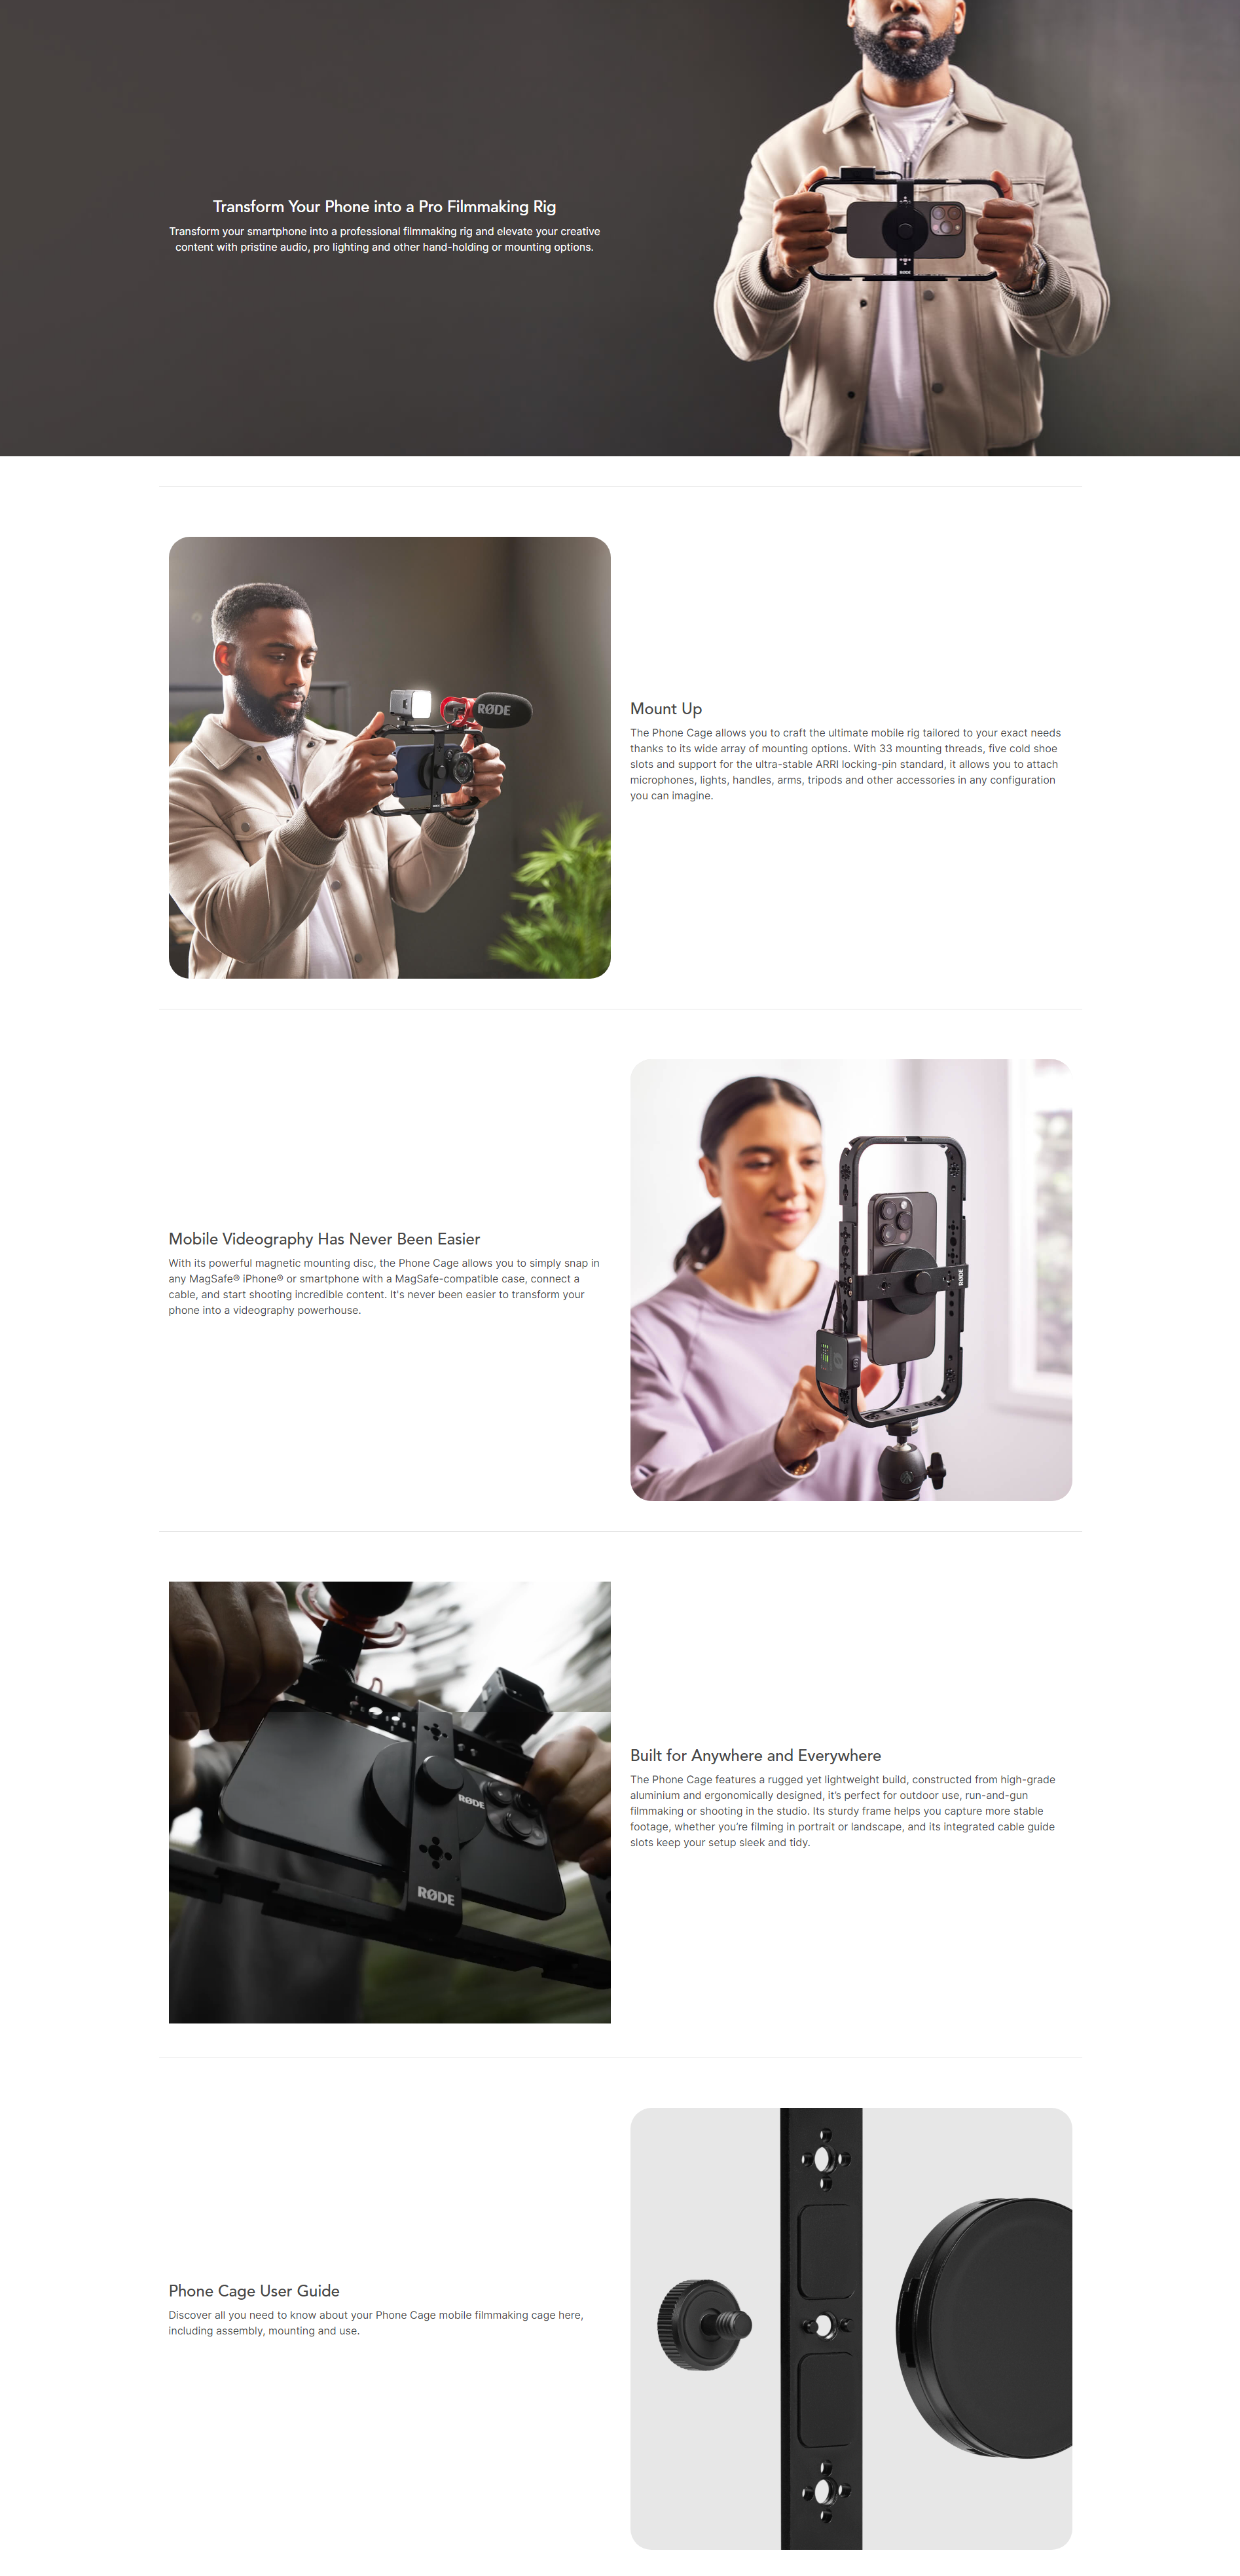 A large marketing image providing additional information about the product Rode Magnetic Mobile Filmmaking Cage - Additional alt info not provided